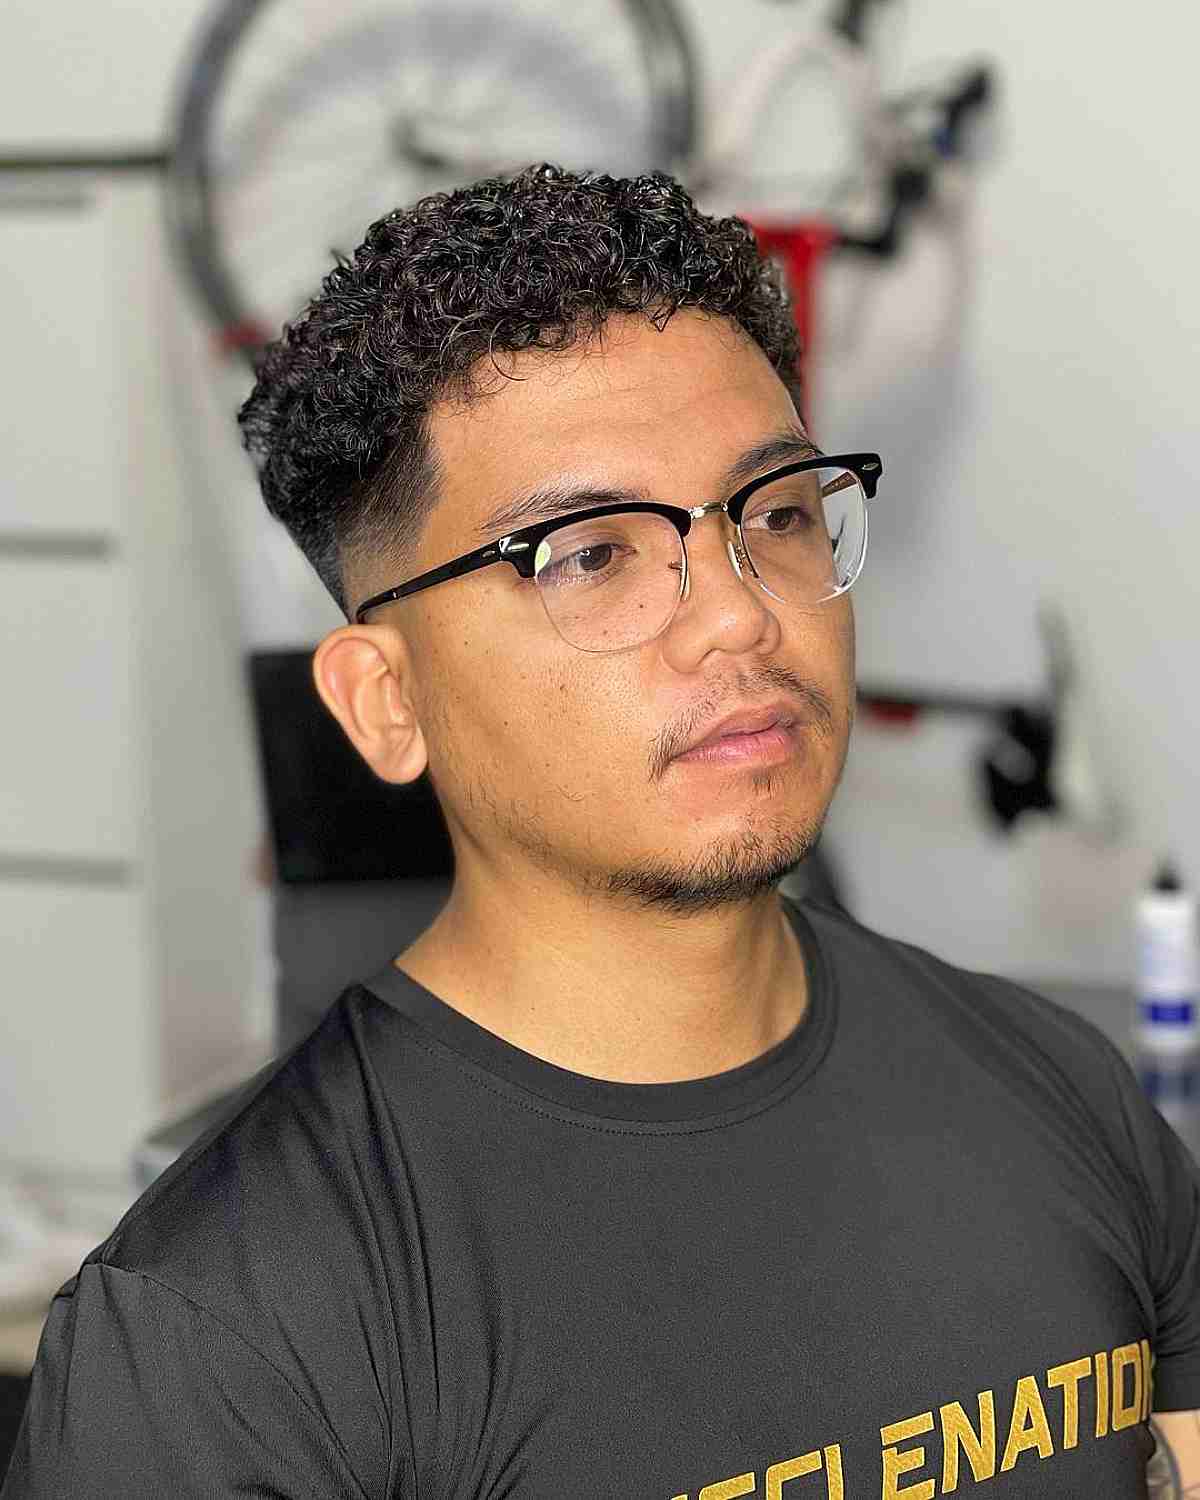 Drop Fade on Perm Hair for Guys